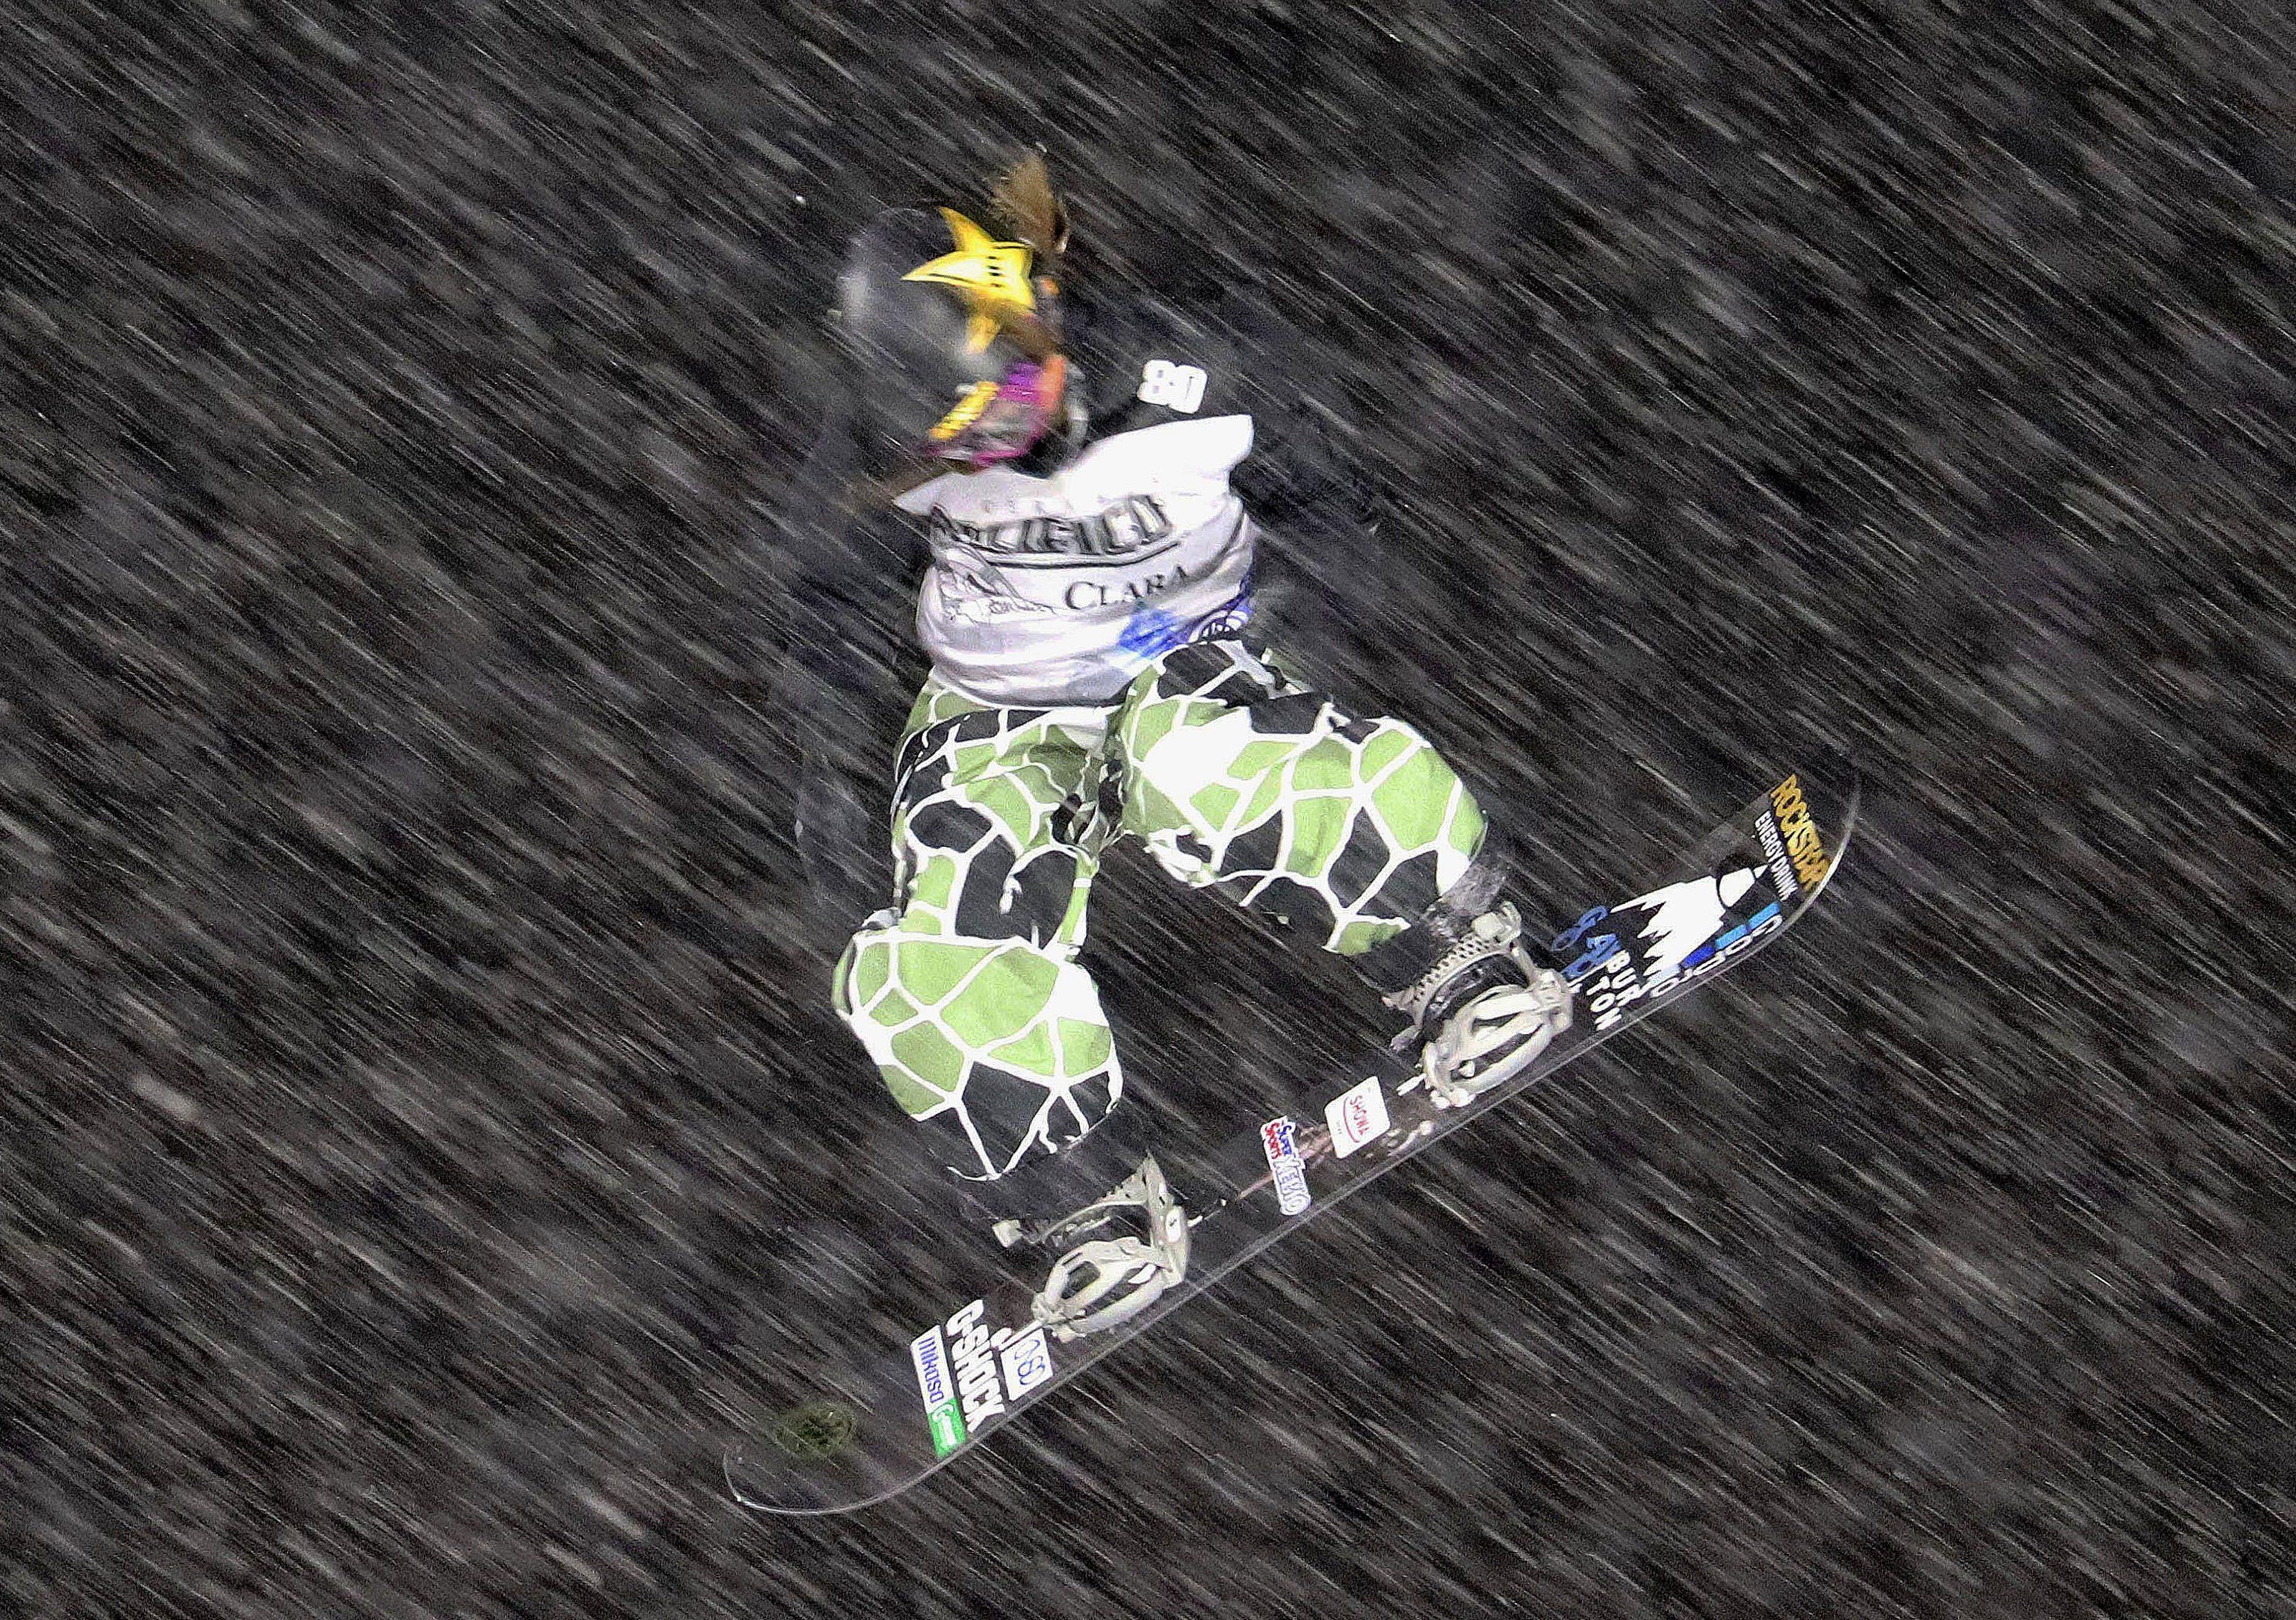 Japan’s Reira Iwabuchi on her way to winning the women’s snowboard Big Air event at the Winter X Games. Photo: Kyodo